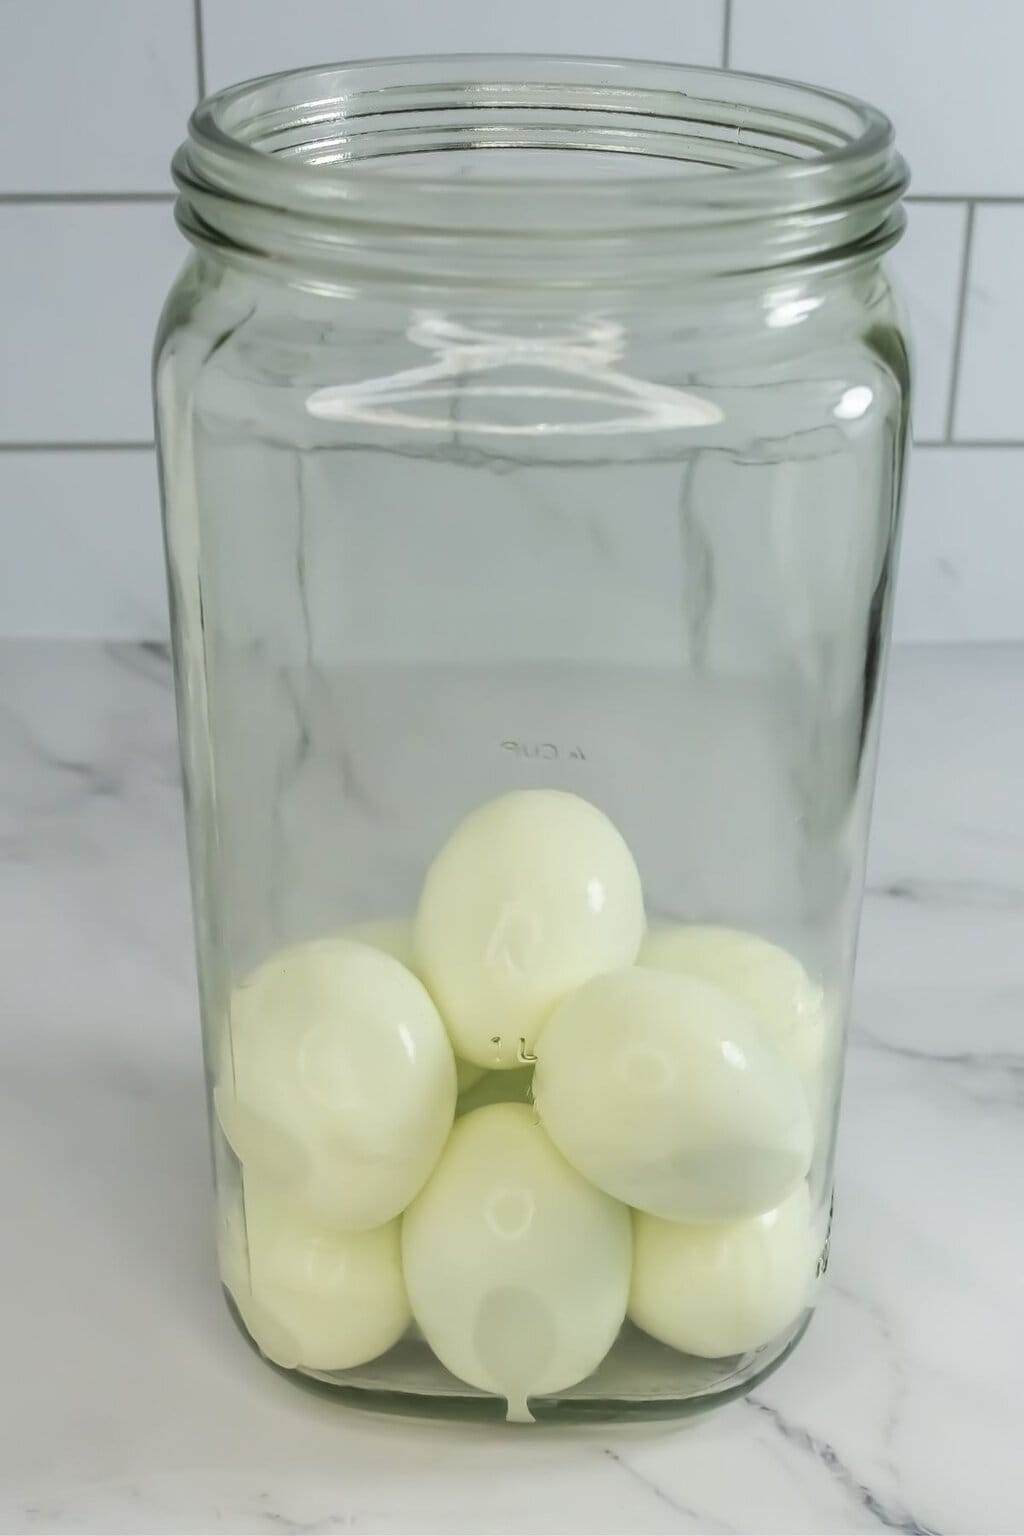 Eggs placed in a glass jar.